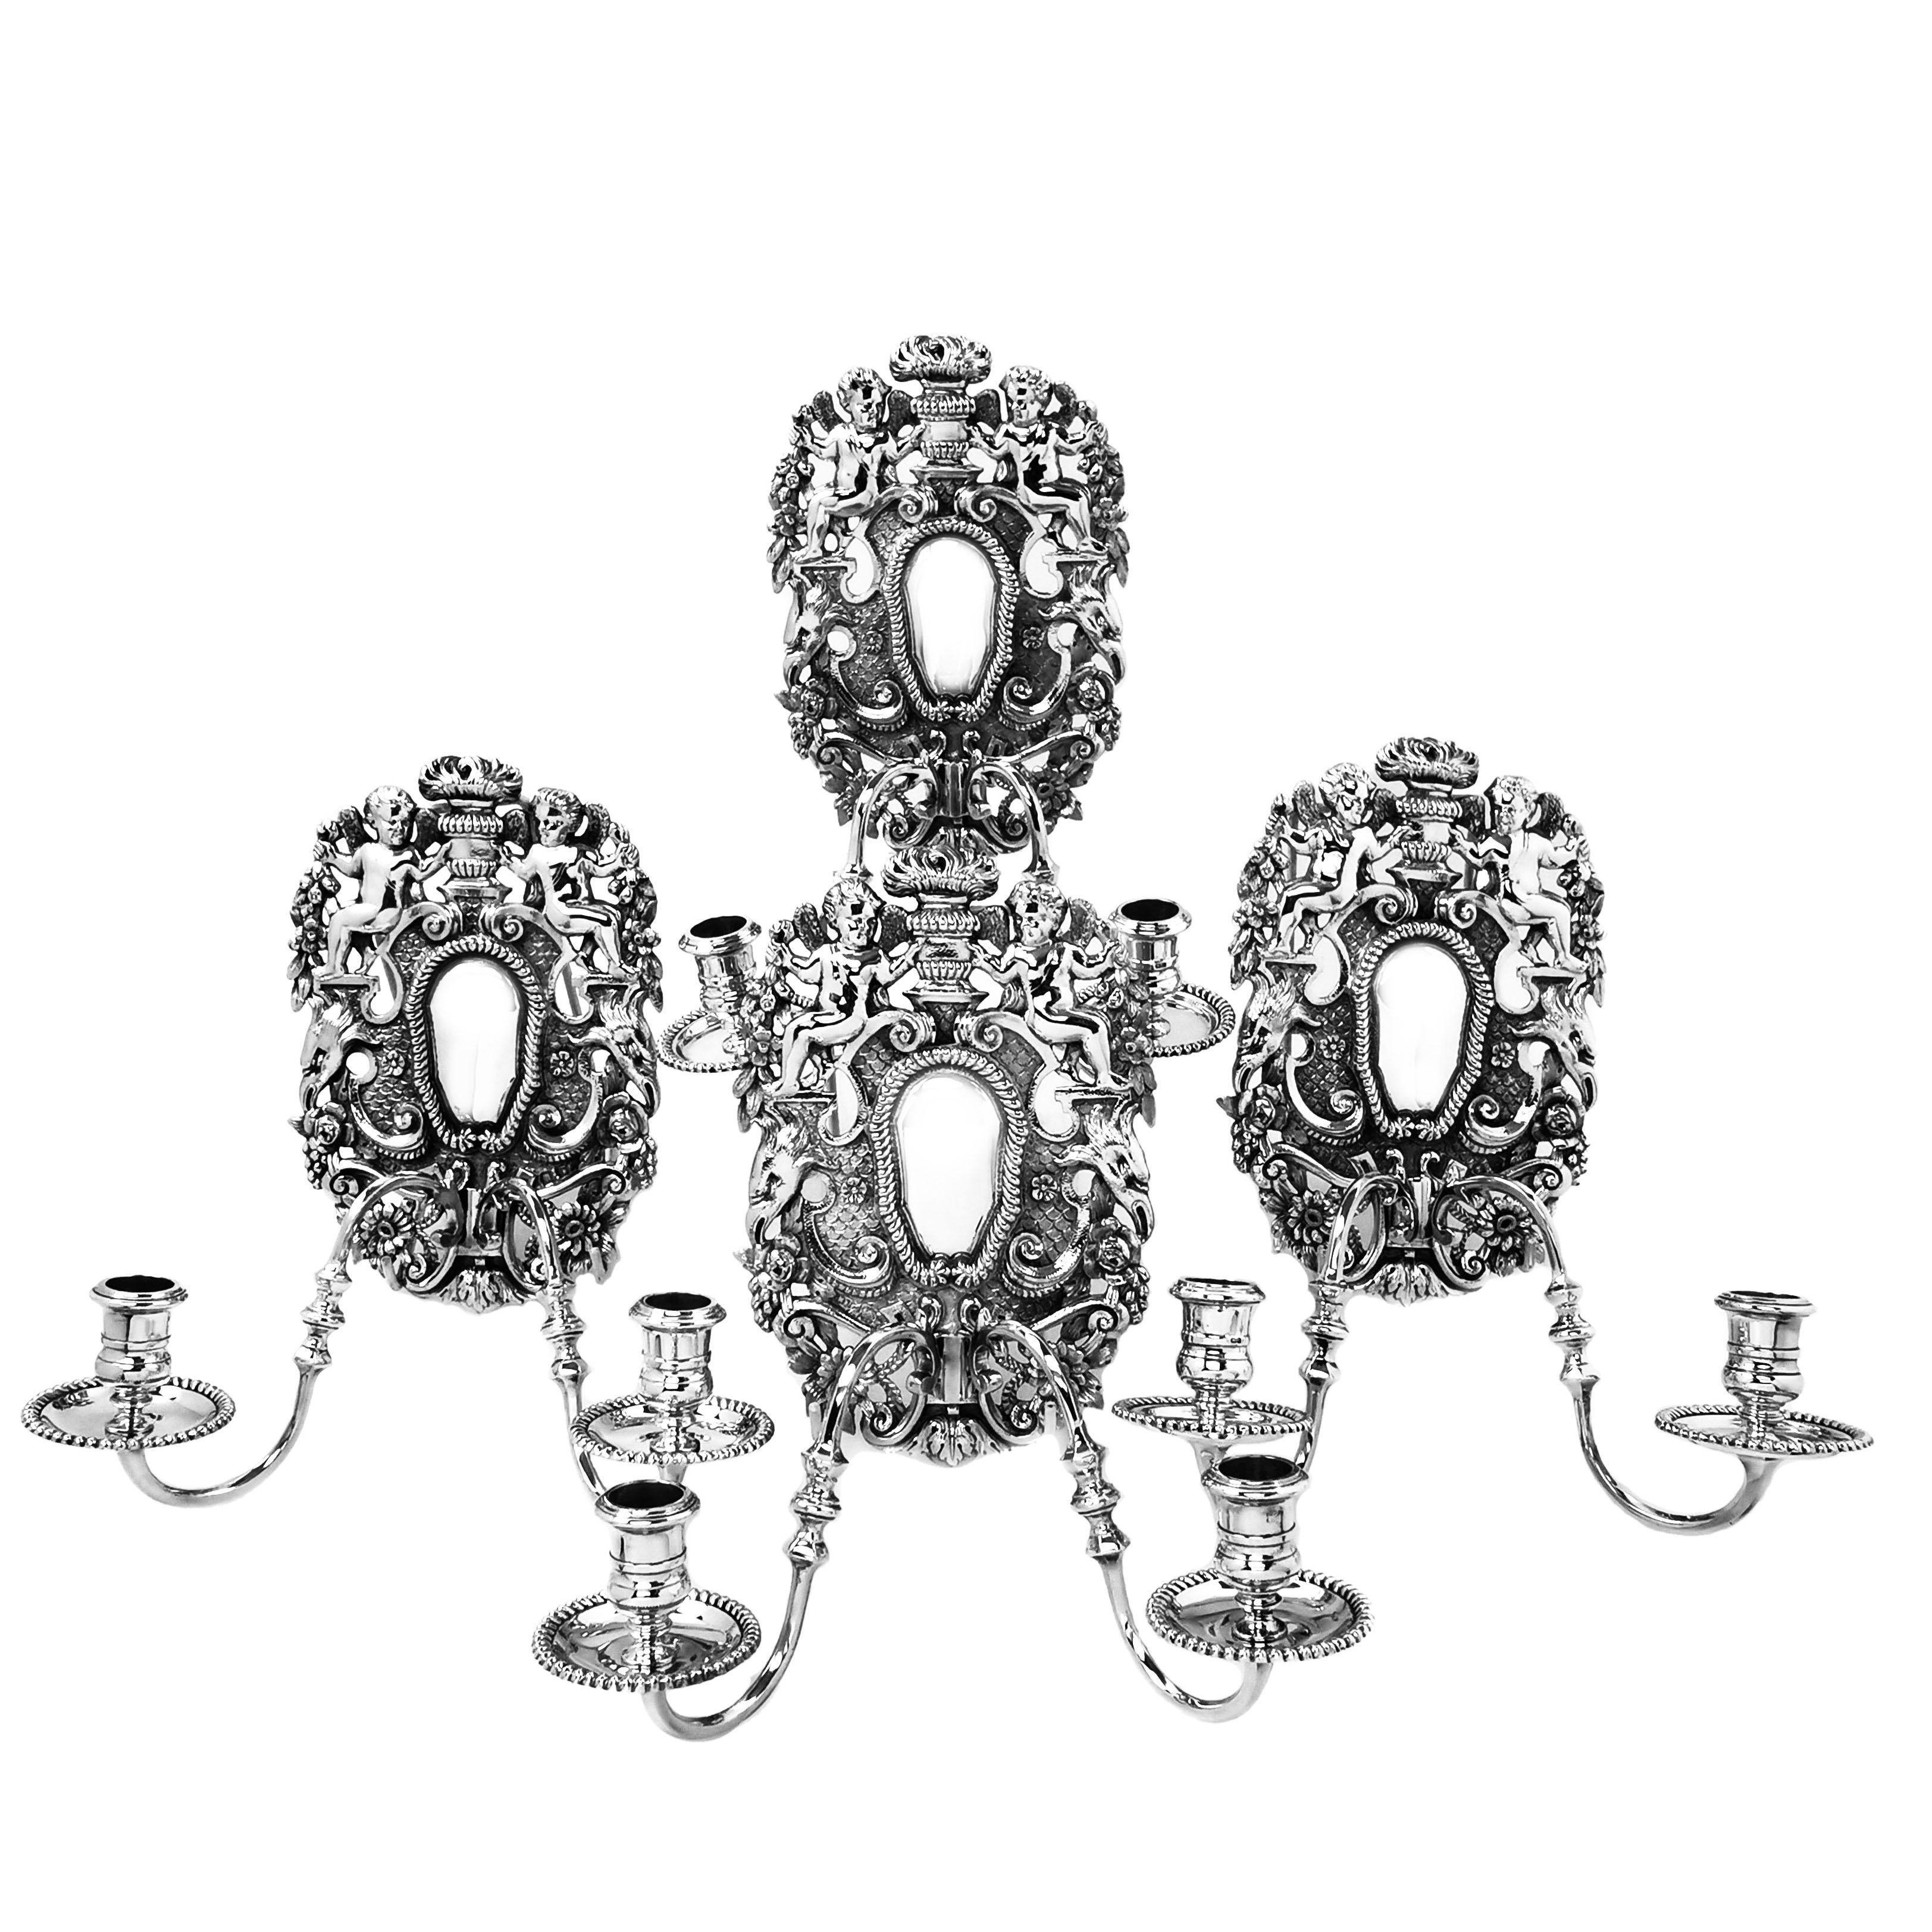 A magnificent set of four solid Silver Wall Sconces for Candles in the late 17th century William III style. This set of four Candle Sconces are a special commission piece retailed by James Robinson of New York but made and hallmarked in England. The